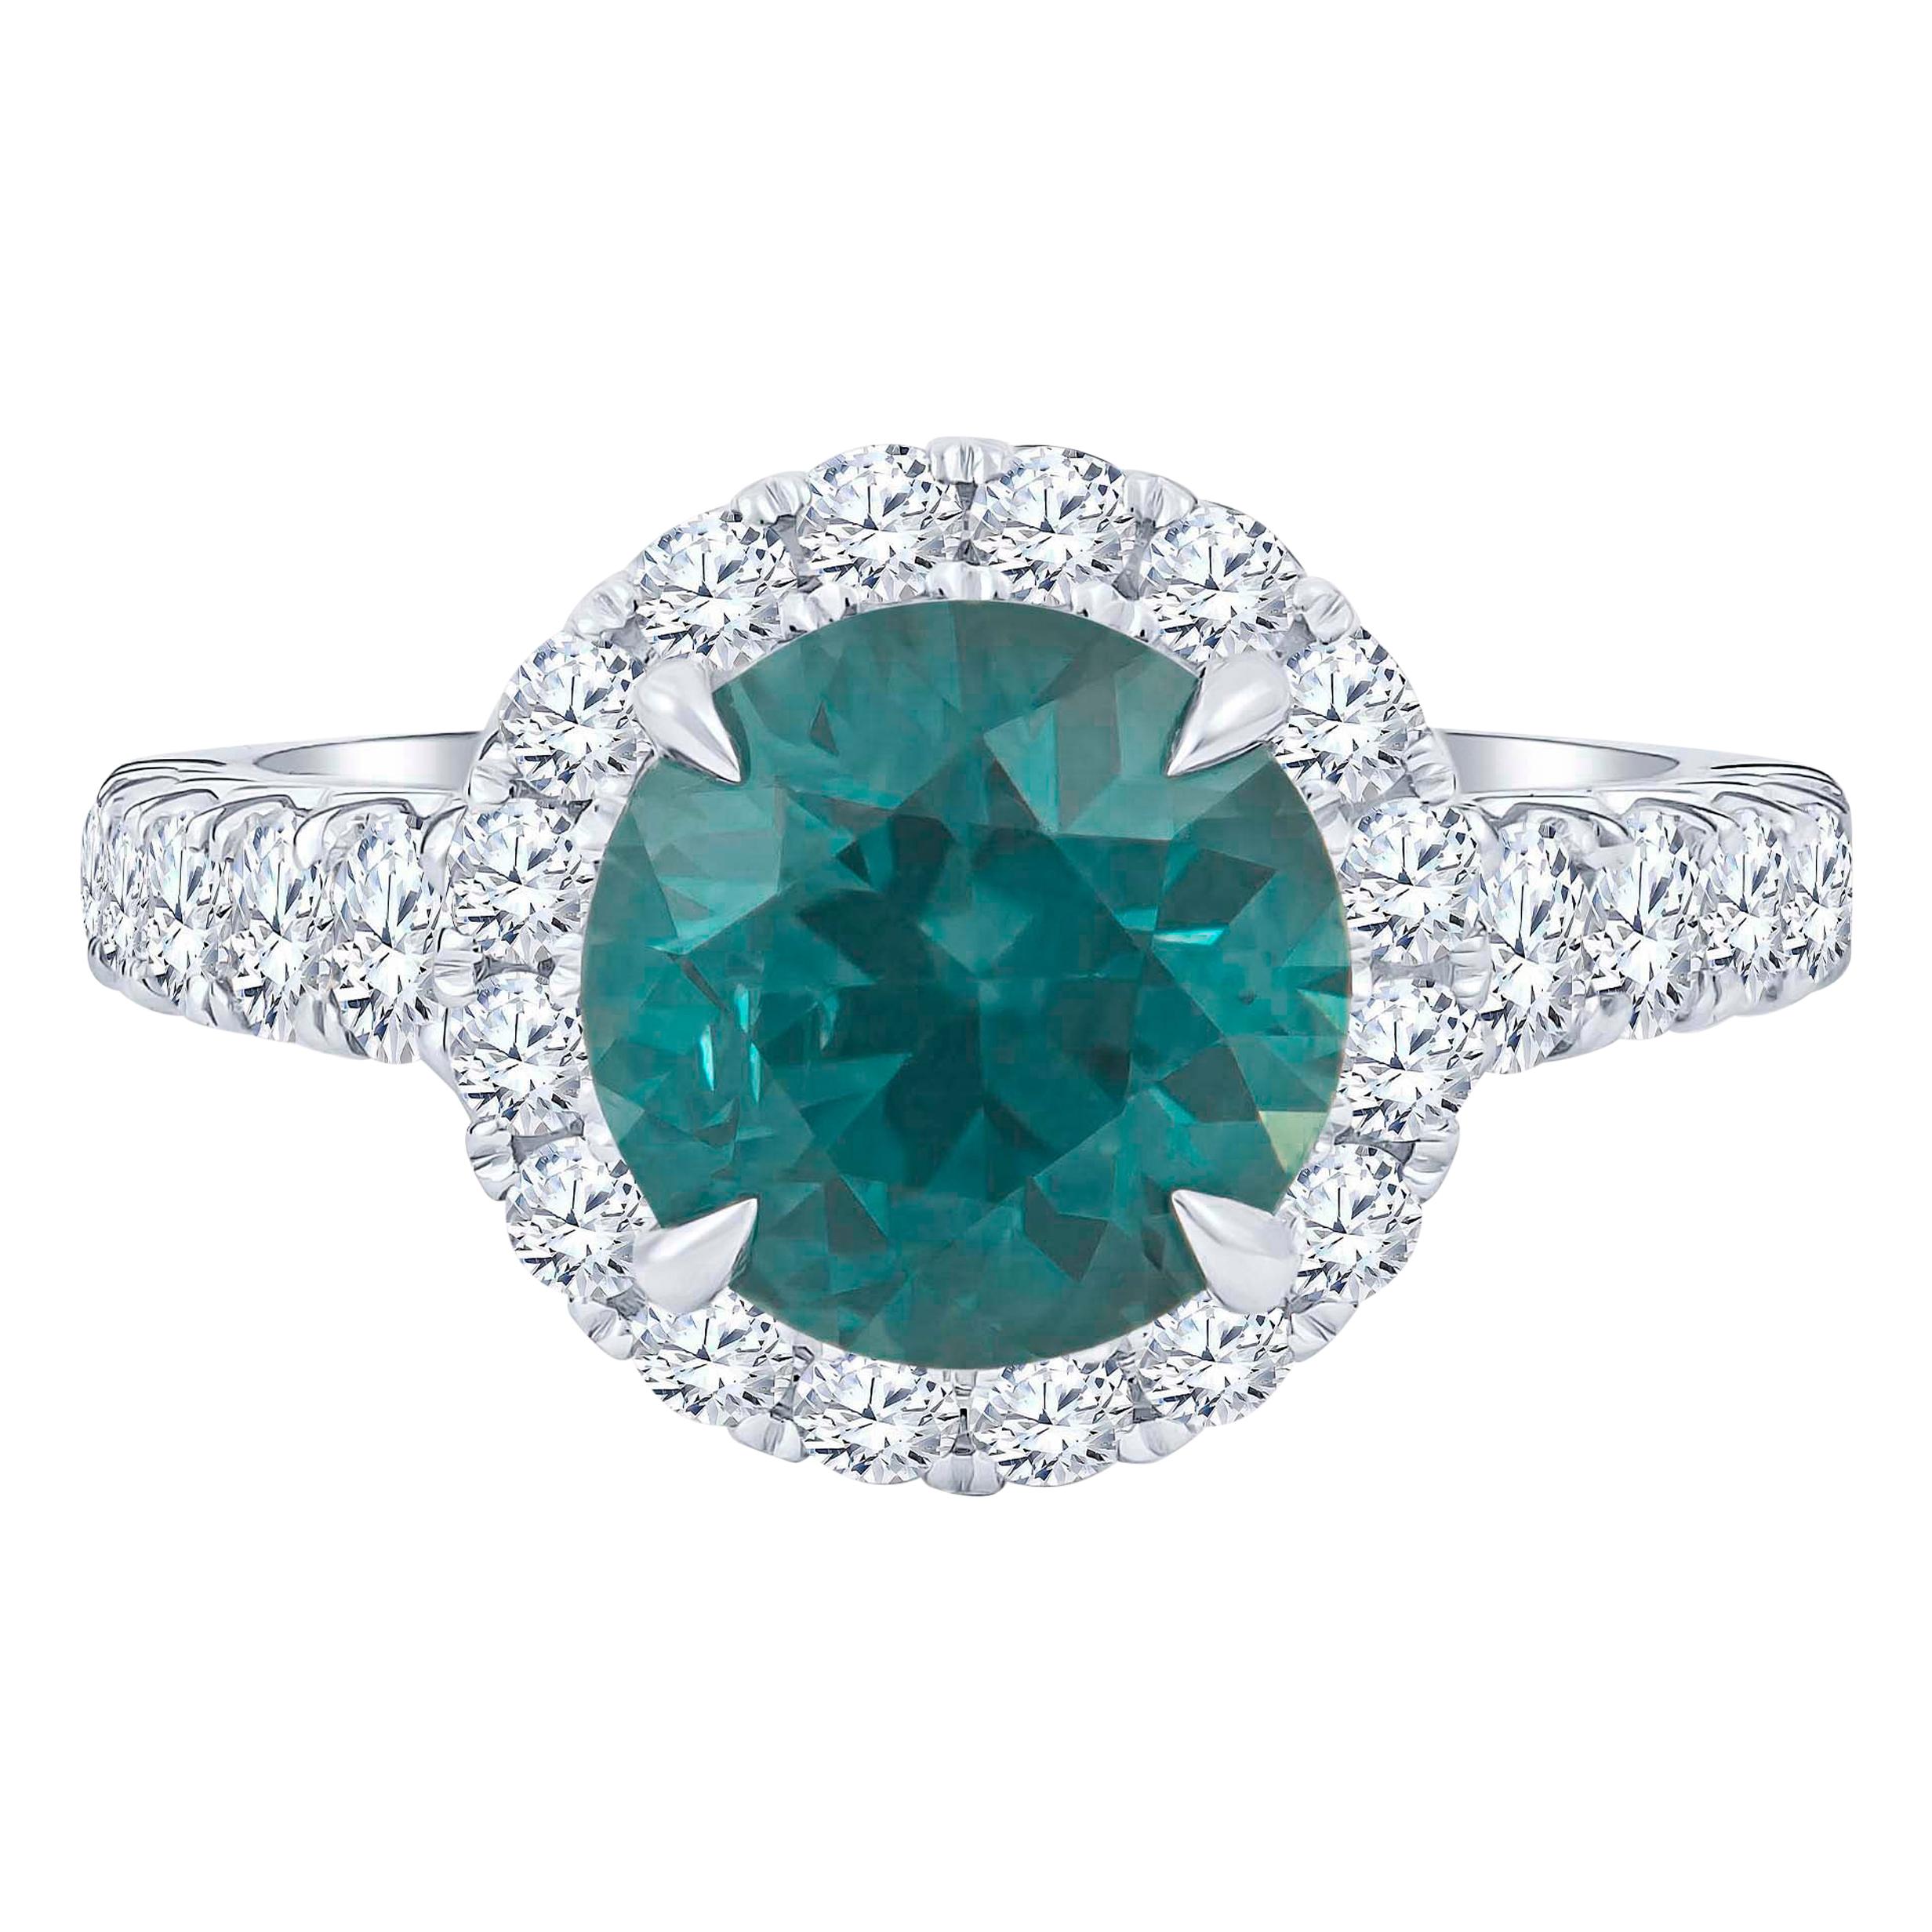 3.58 Carat Round Green-Blue Montana Sapphire 'AGL' and Diamond Engagement Ring